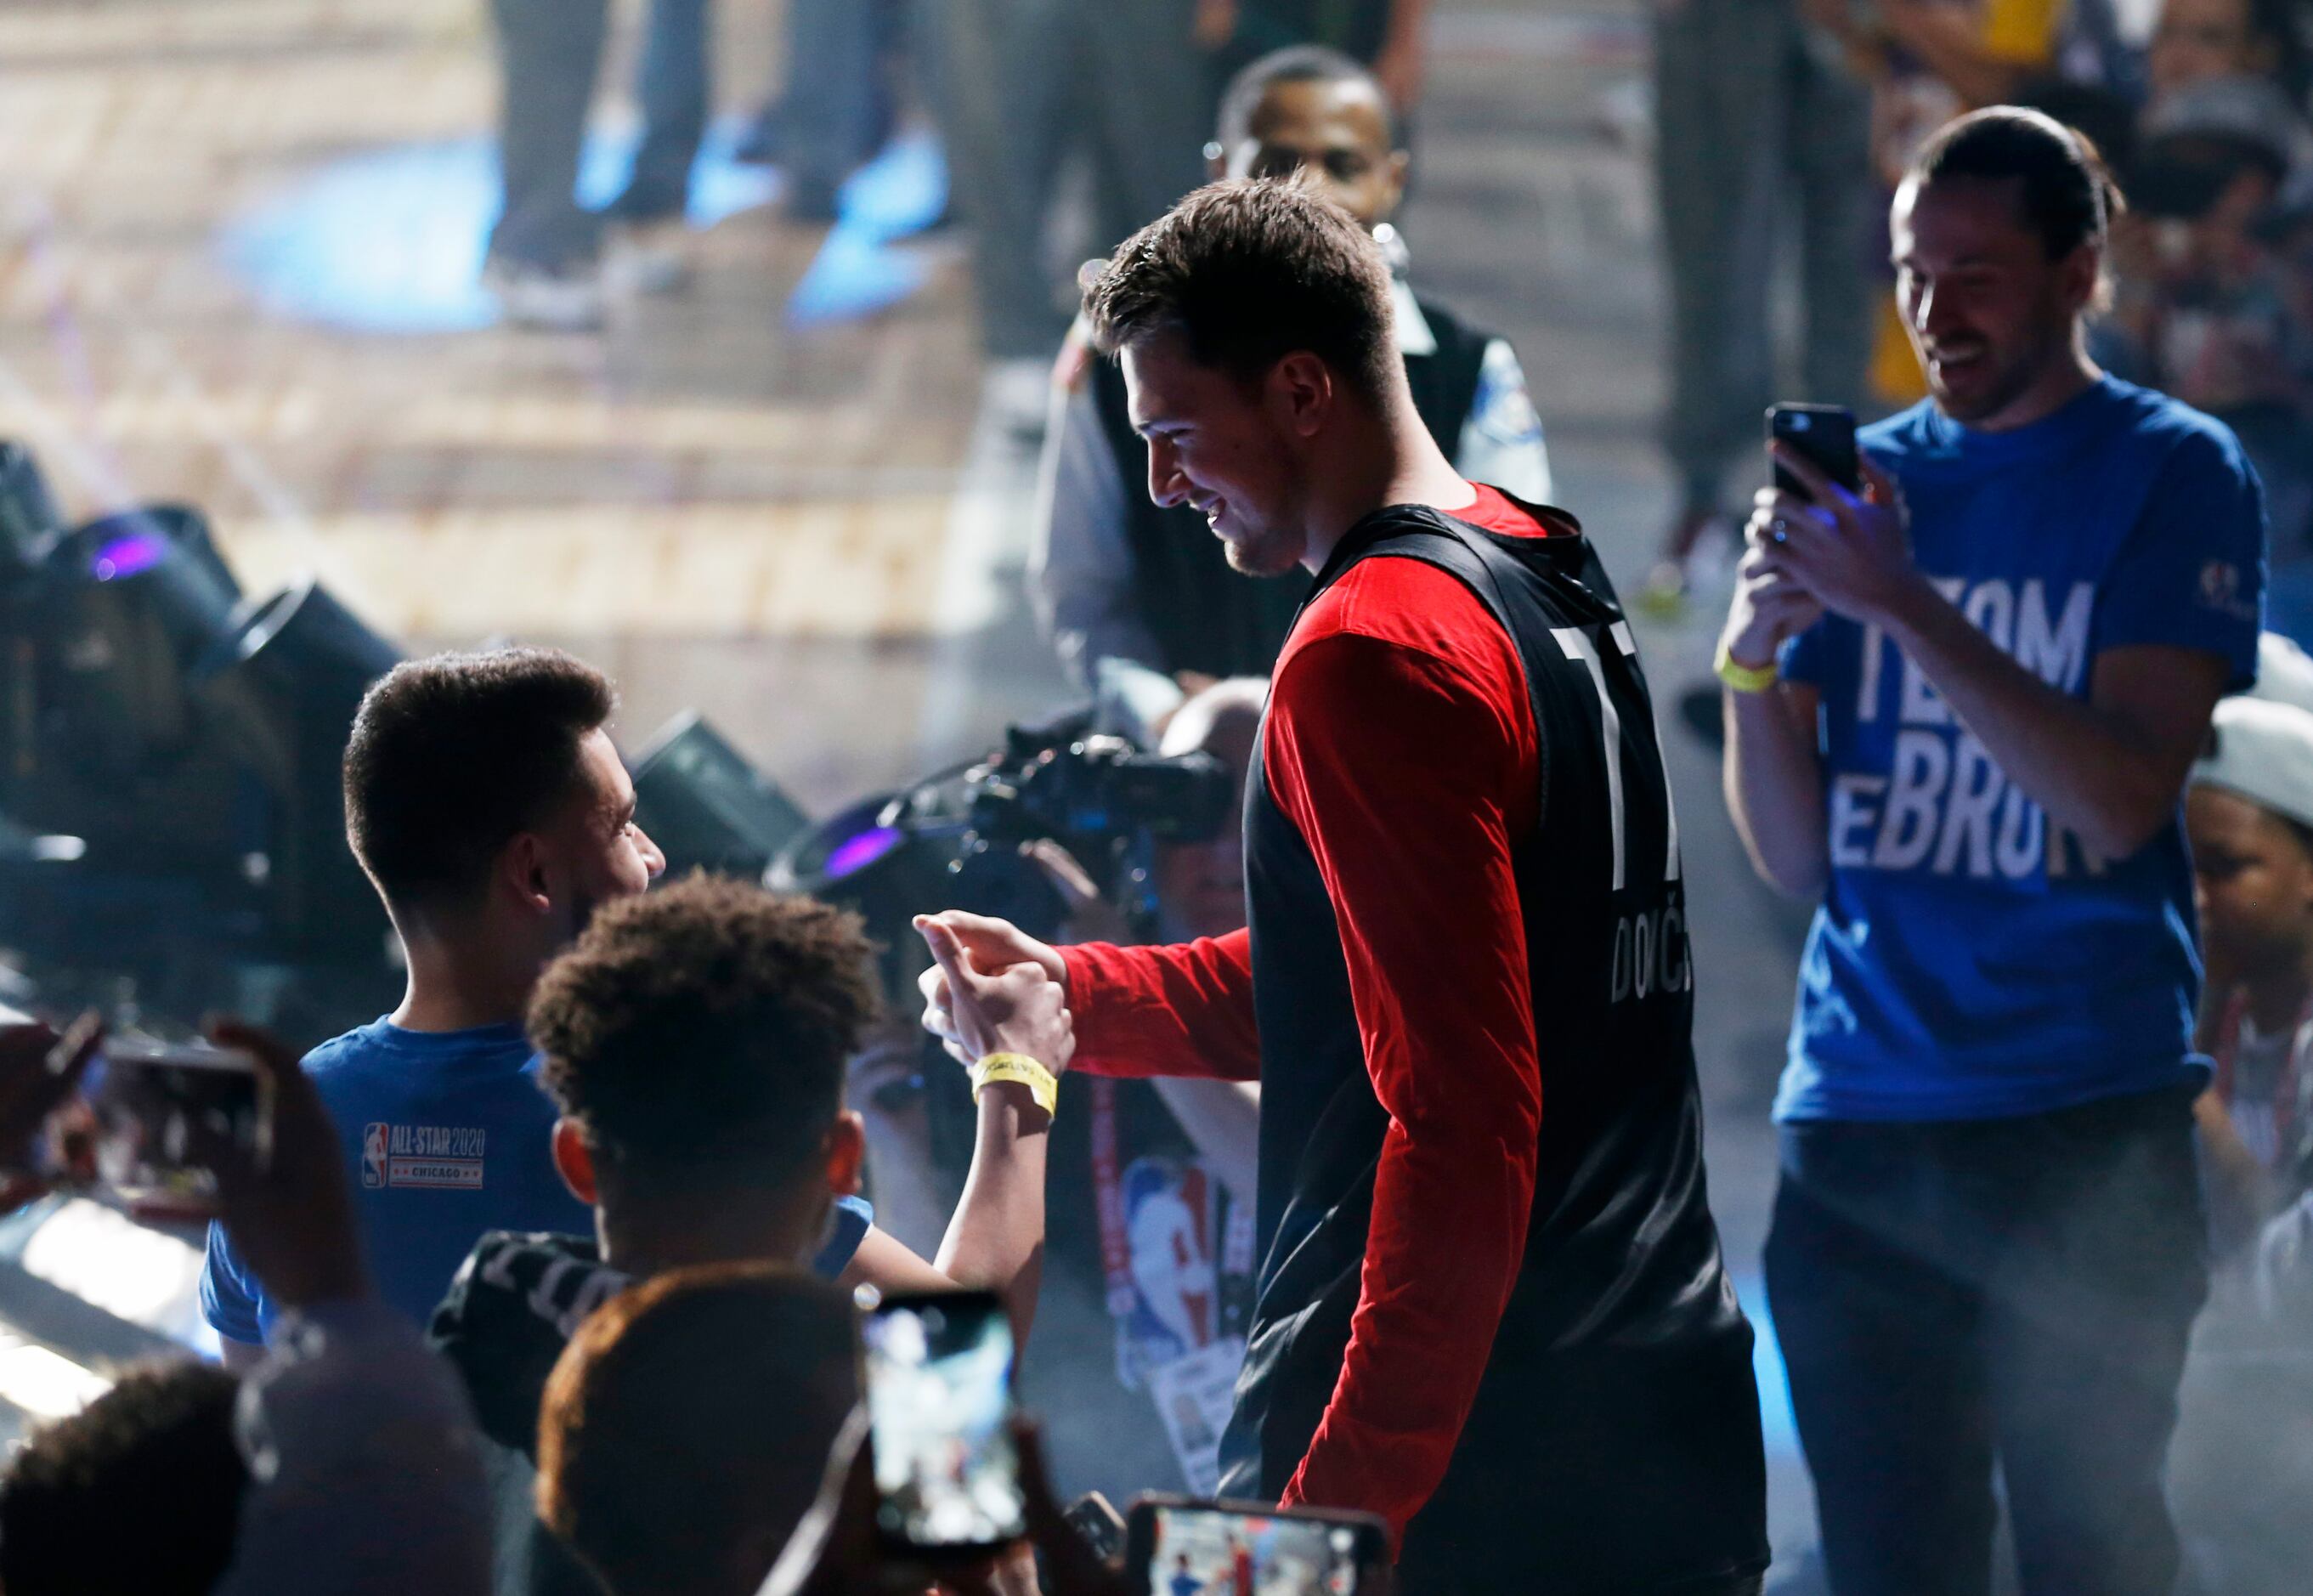 Luka Doncic 77 T-Shirt For Fans